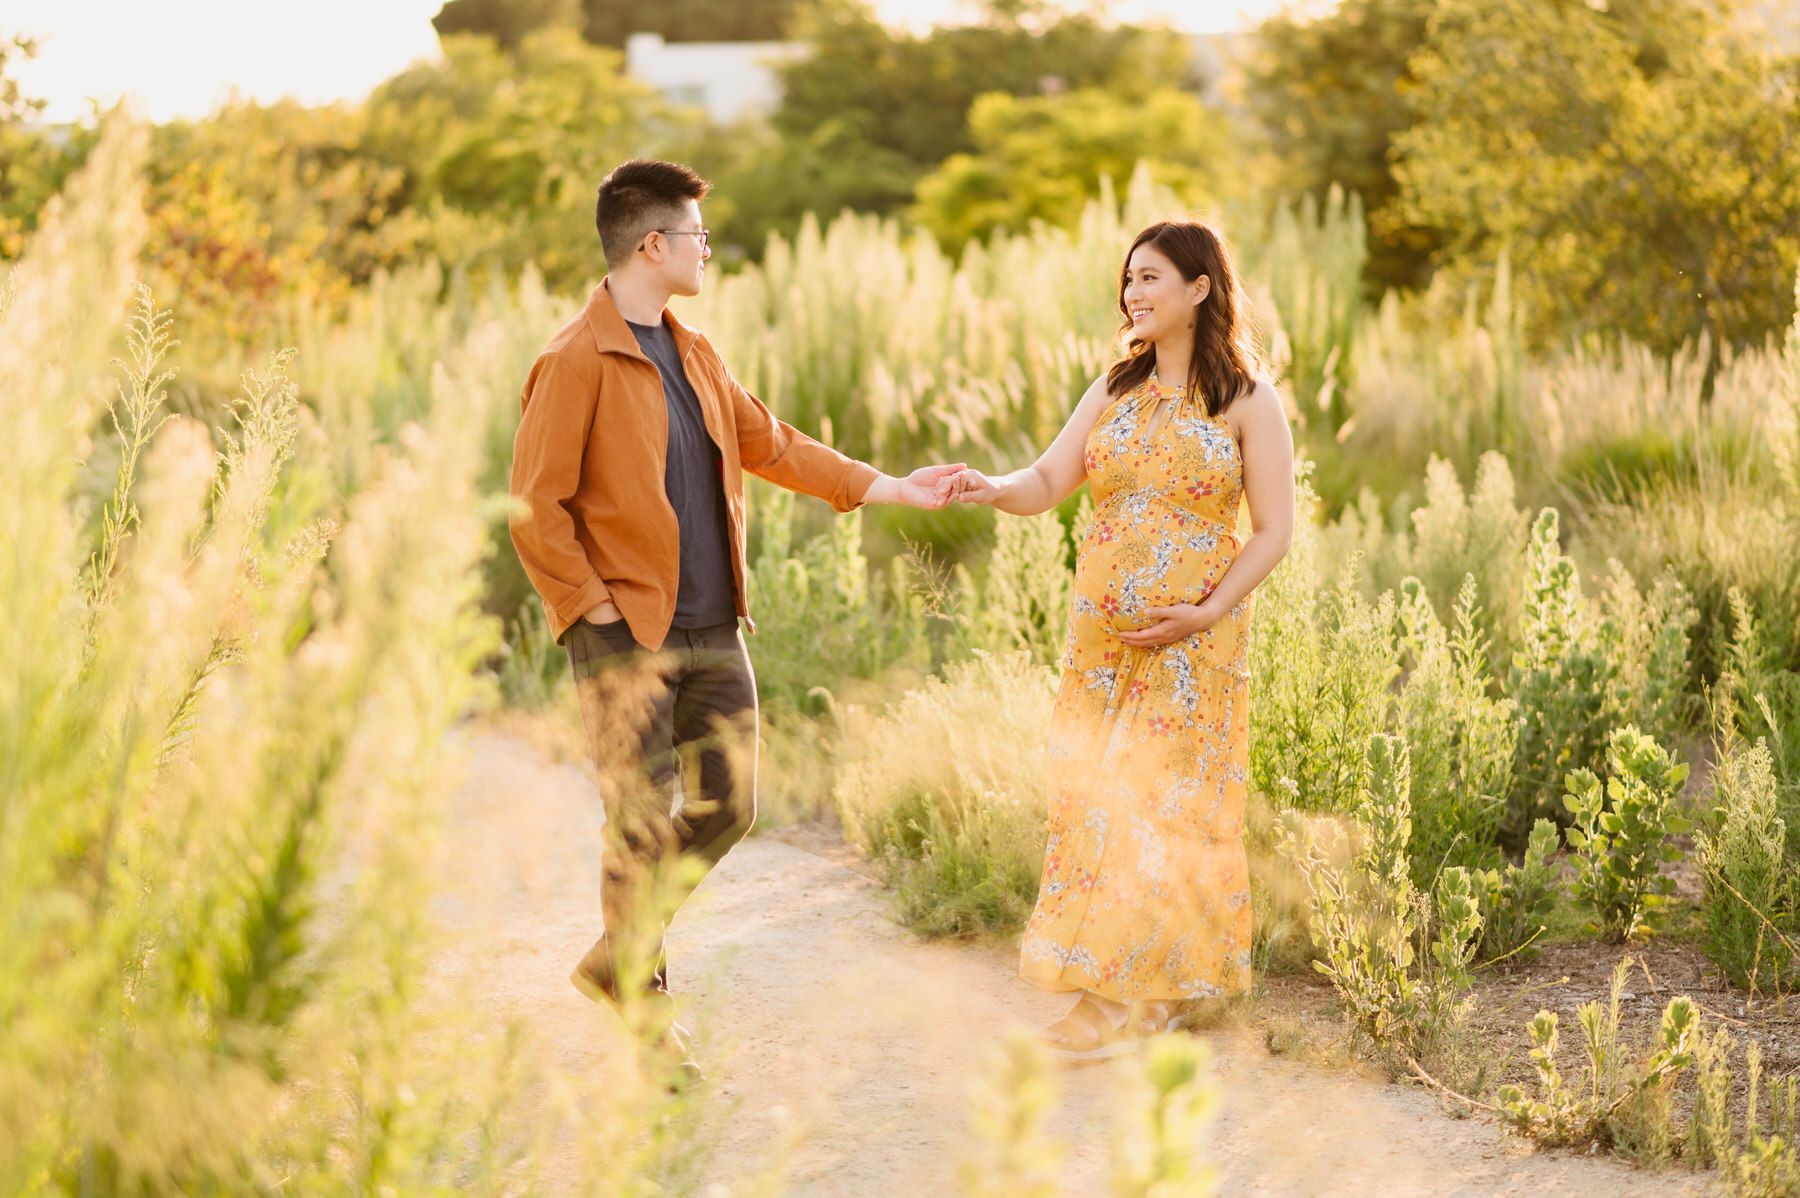 A man and a pregnant woman are holding hands in a field.